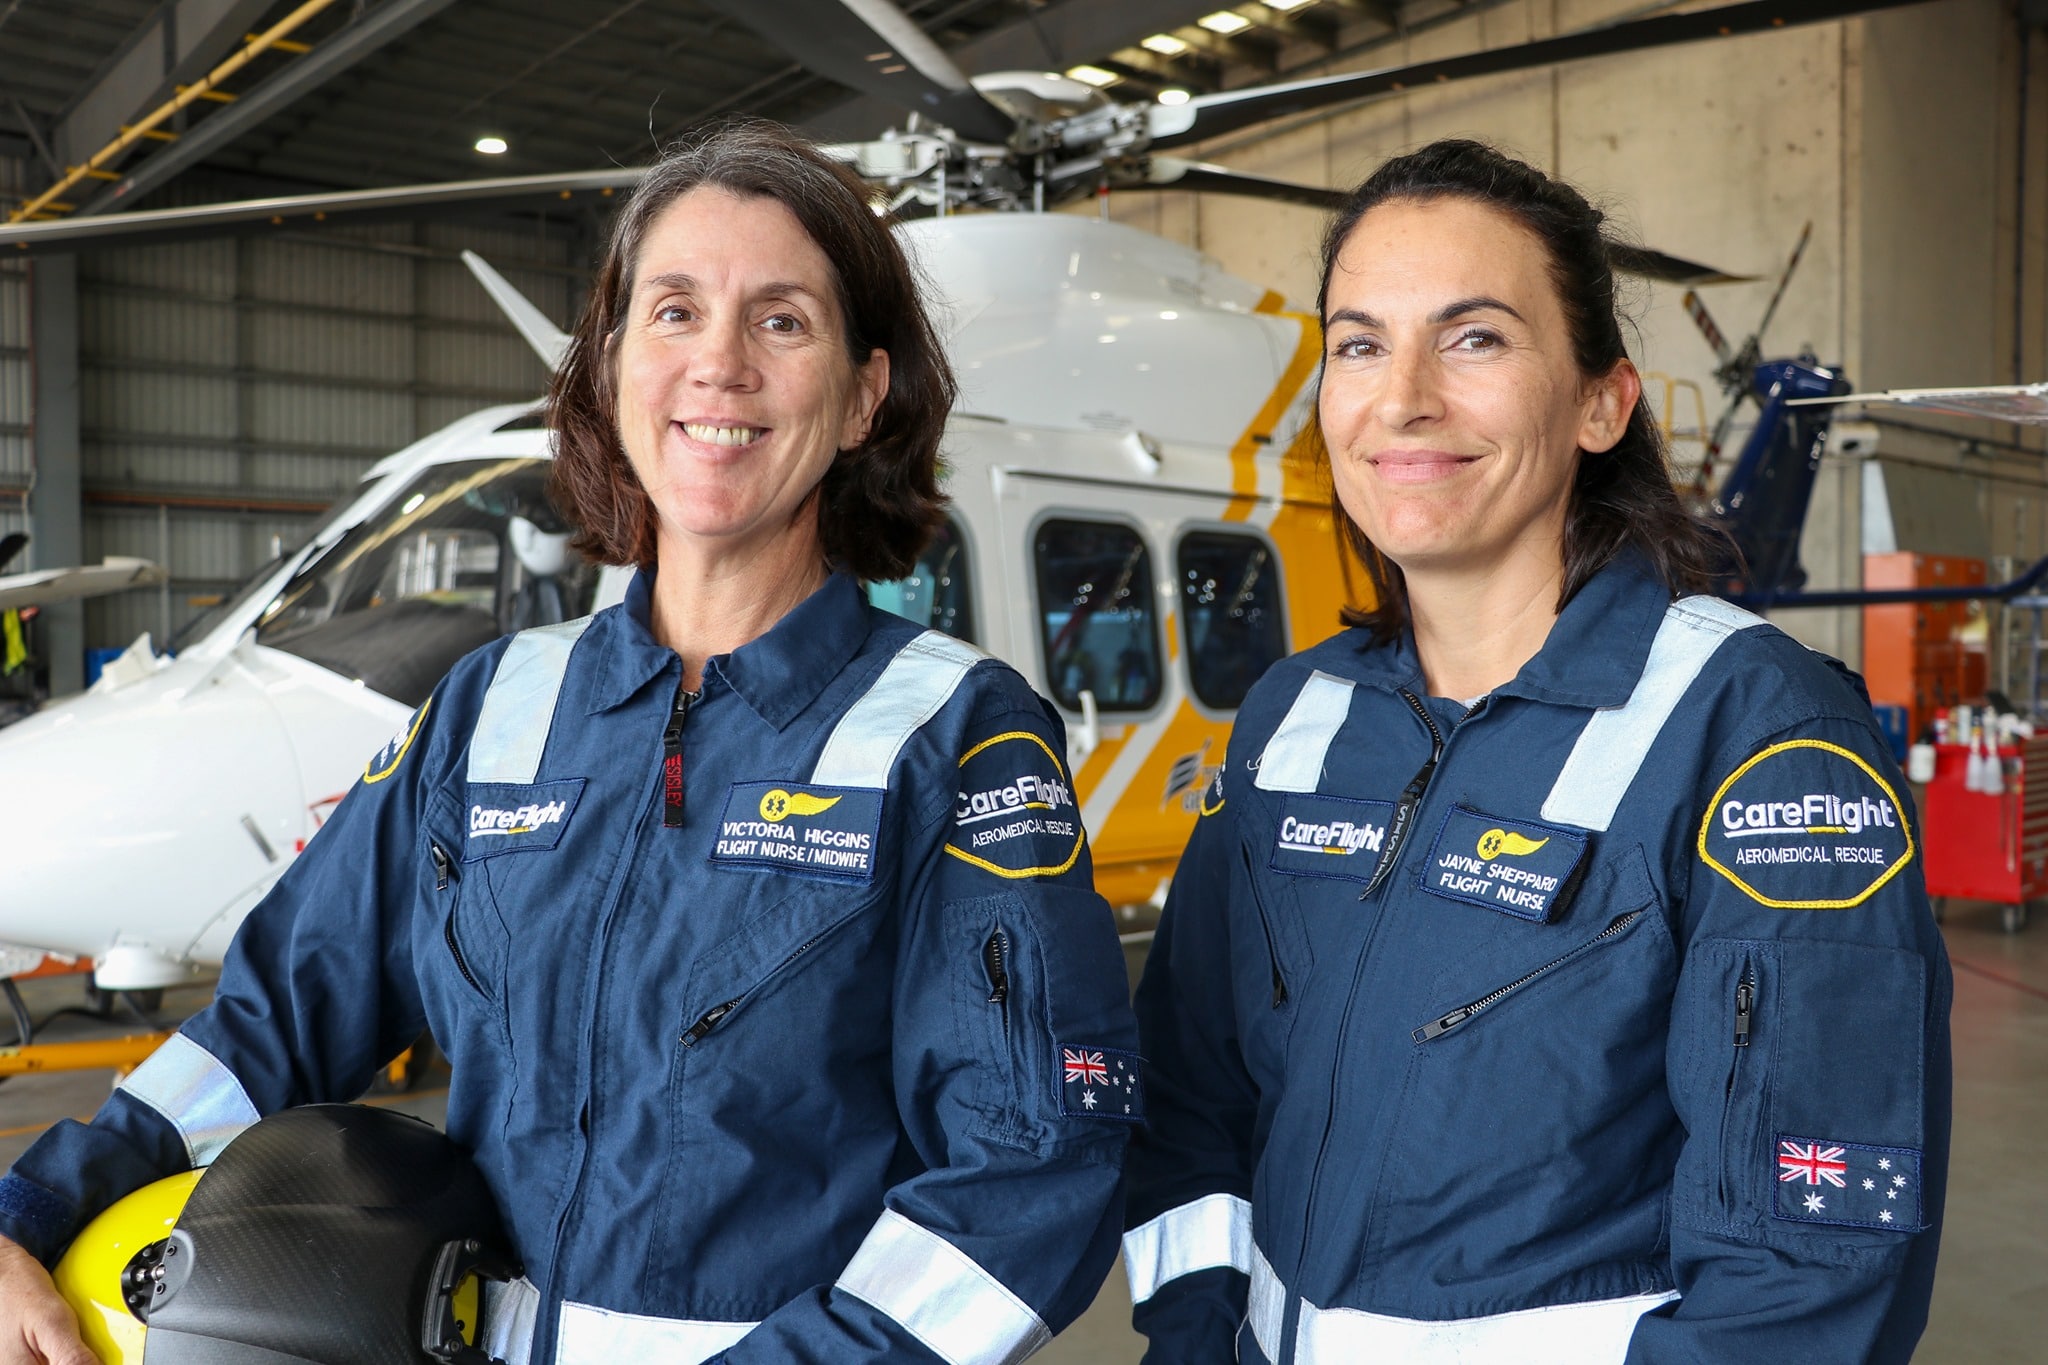 Careers CareFlight flight nurses are a part of our medical teams